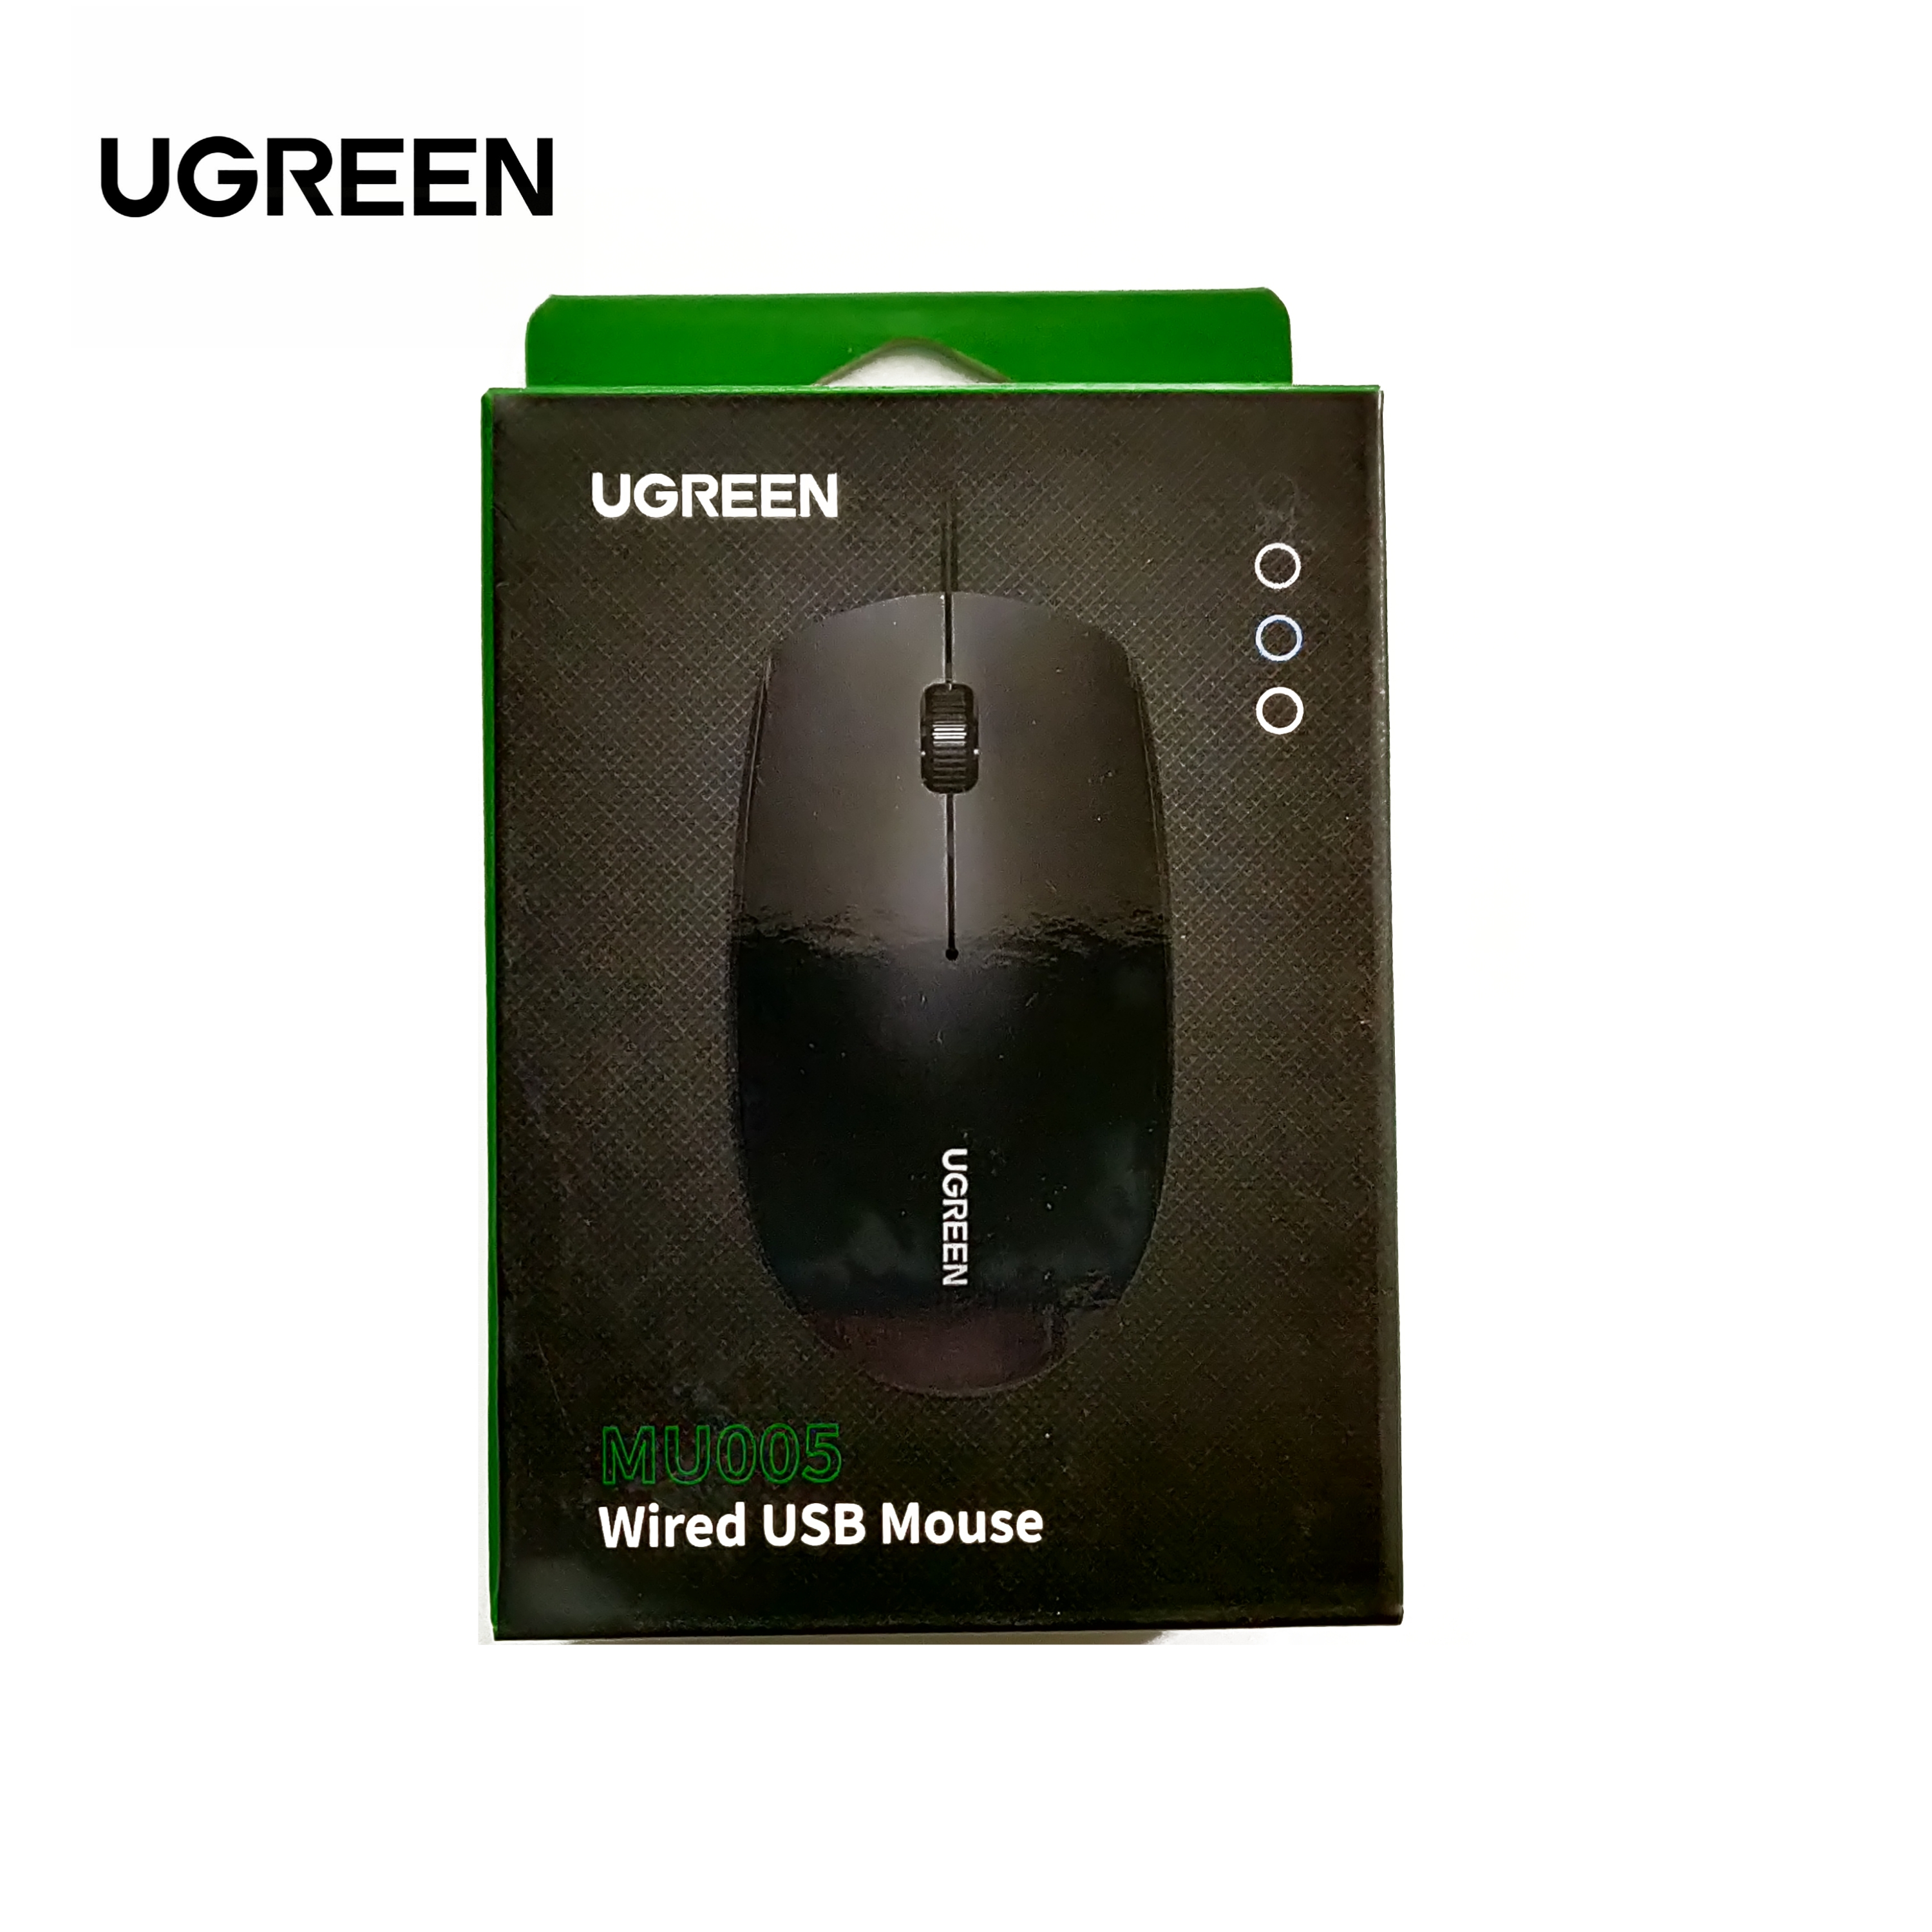 UGREEN MU005 WIRED USB MOUSE